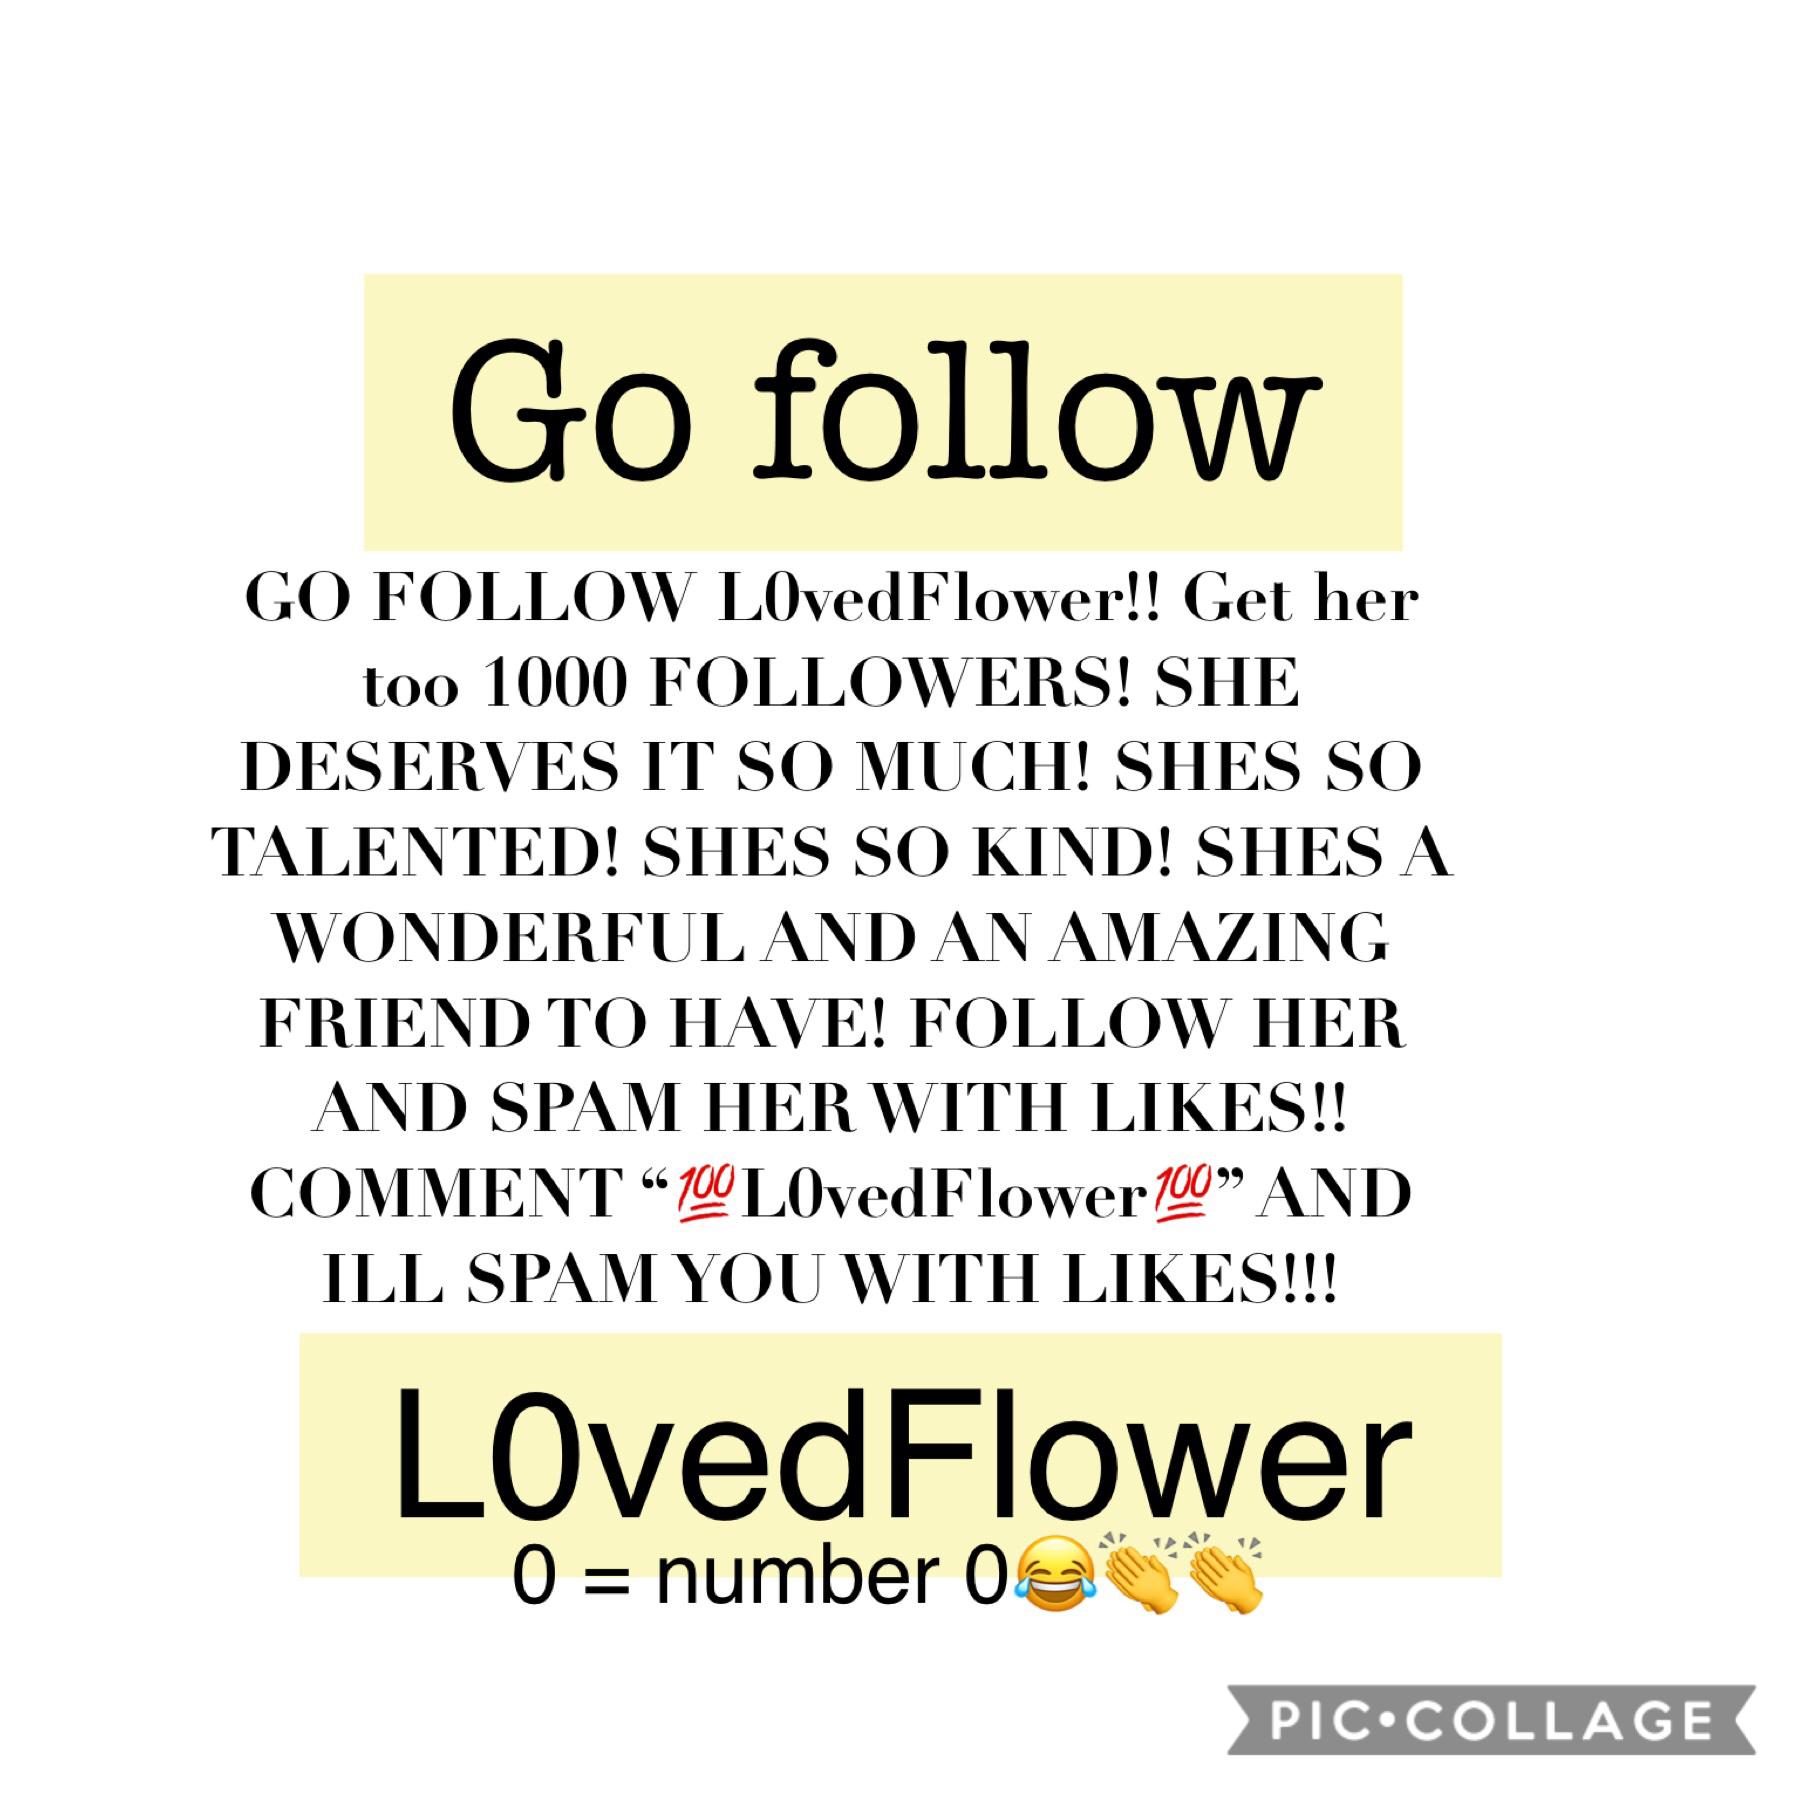 MUST MUST MUST TAP!!
are you following L0vedFlower?! Follow RAE NOW!! 

x anonymous💛 (try and guess who I am, clue my favourite colour is yellow!!💛💛💯